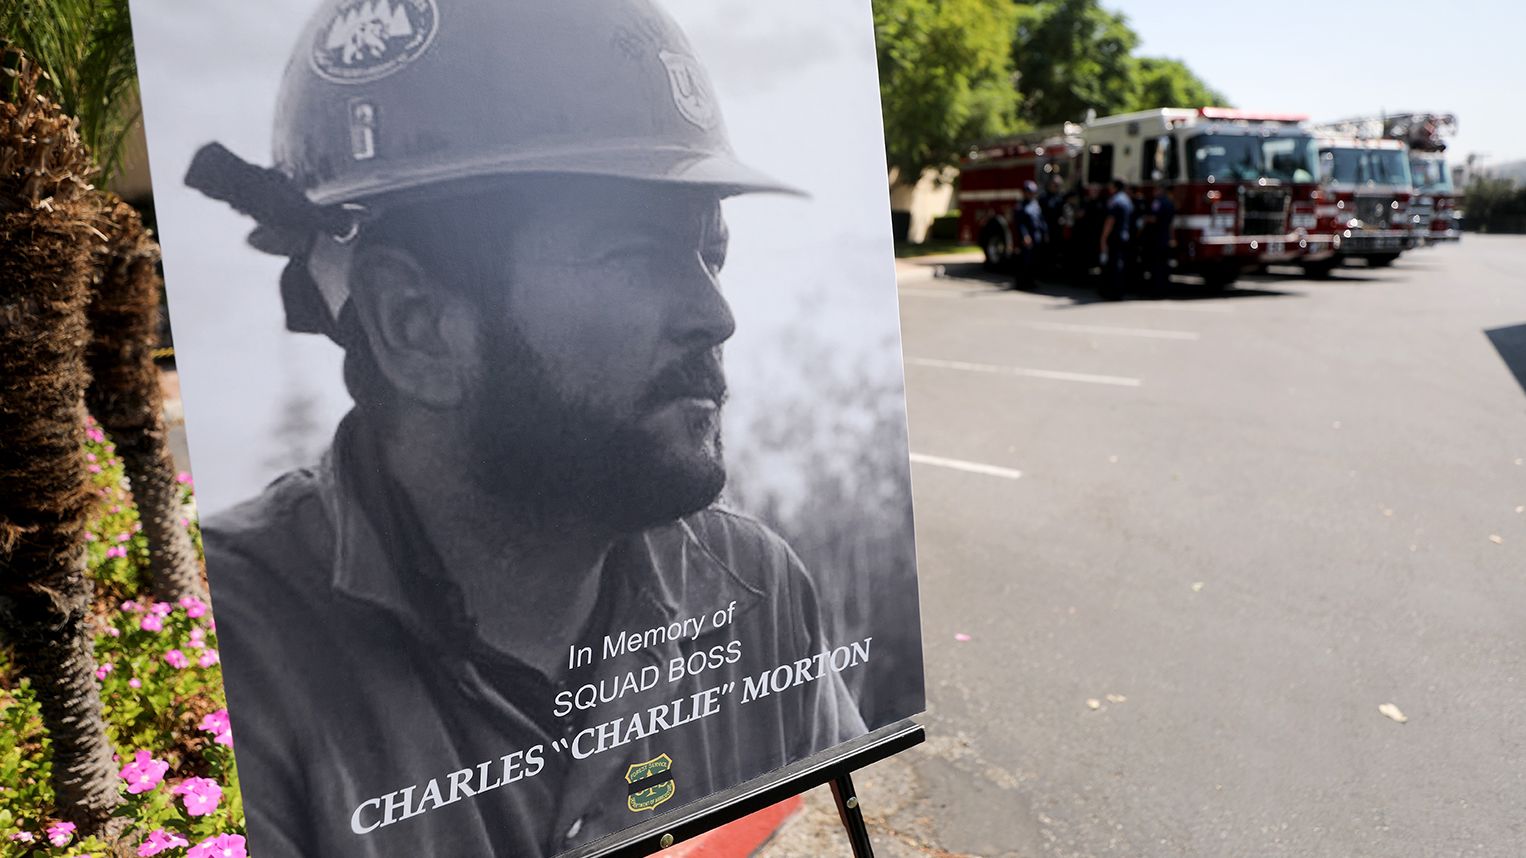 A photograph of Charles Morton, a firefighter killed battling the El Dorado Fire, is displayed at a memorial service in San Bernardino, California, on September 25, 2020. Morton, 39, was a 14-year veteran of the US Forest Service and a squad boss with the Big Bear Hotshot Crew of the San Bernardino National Forest.